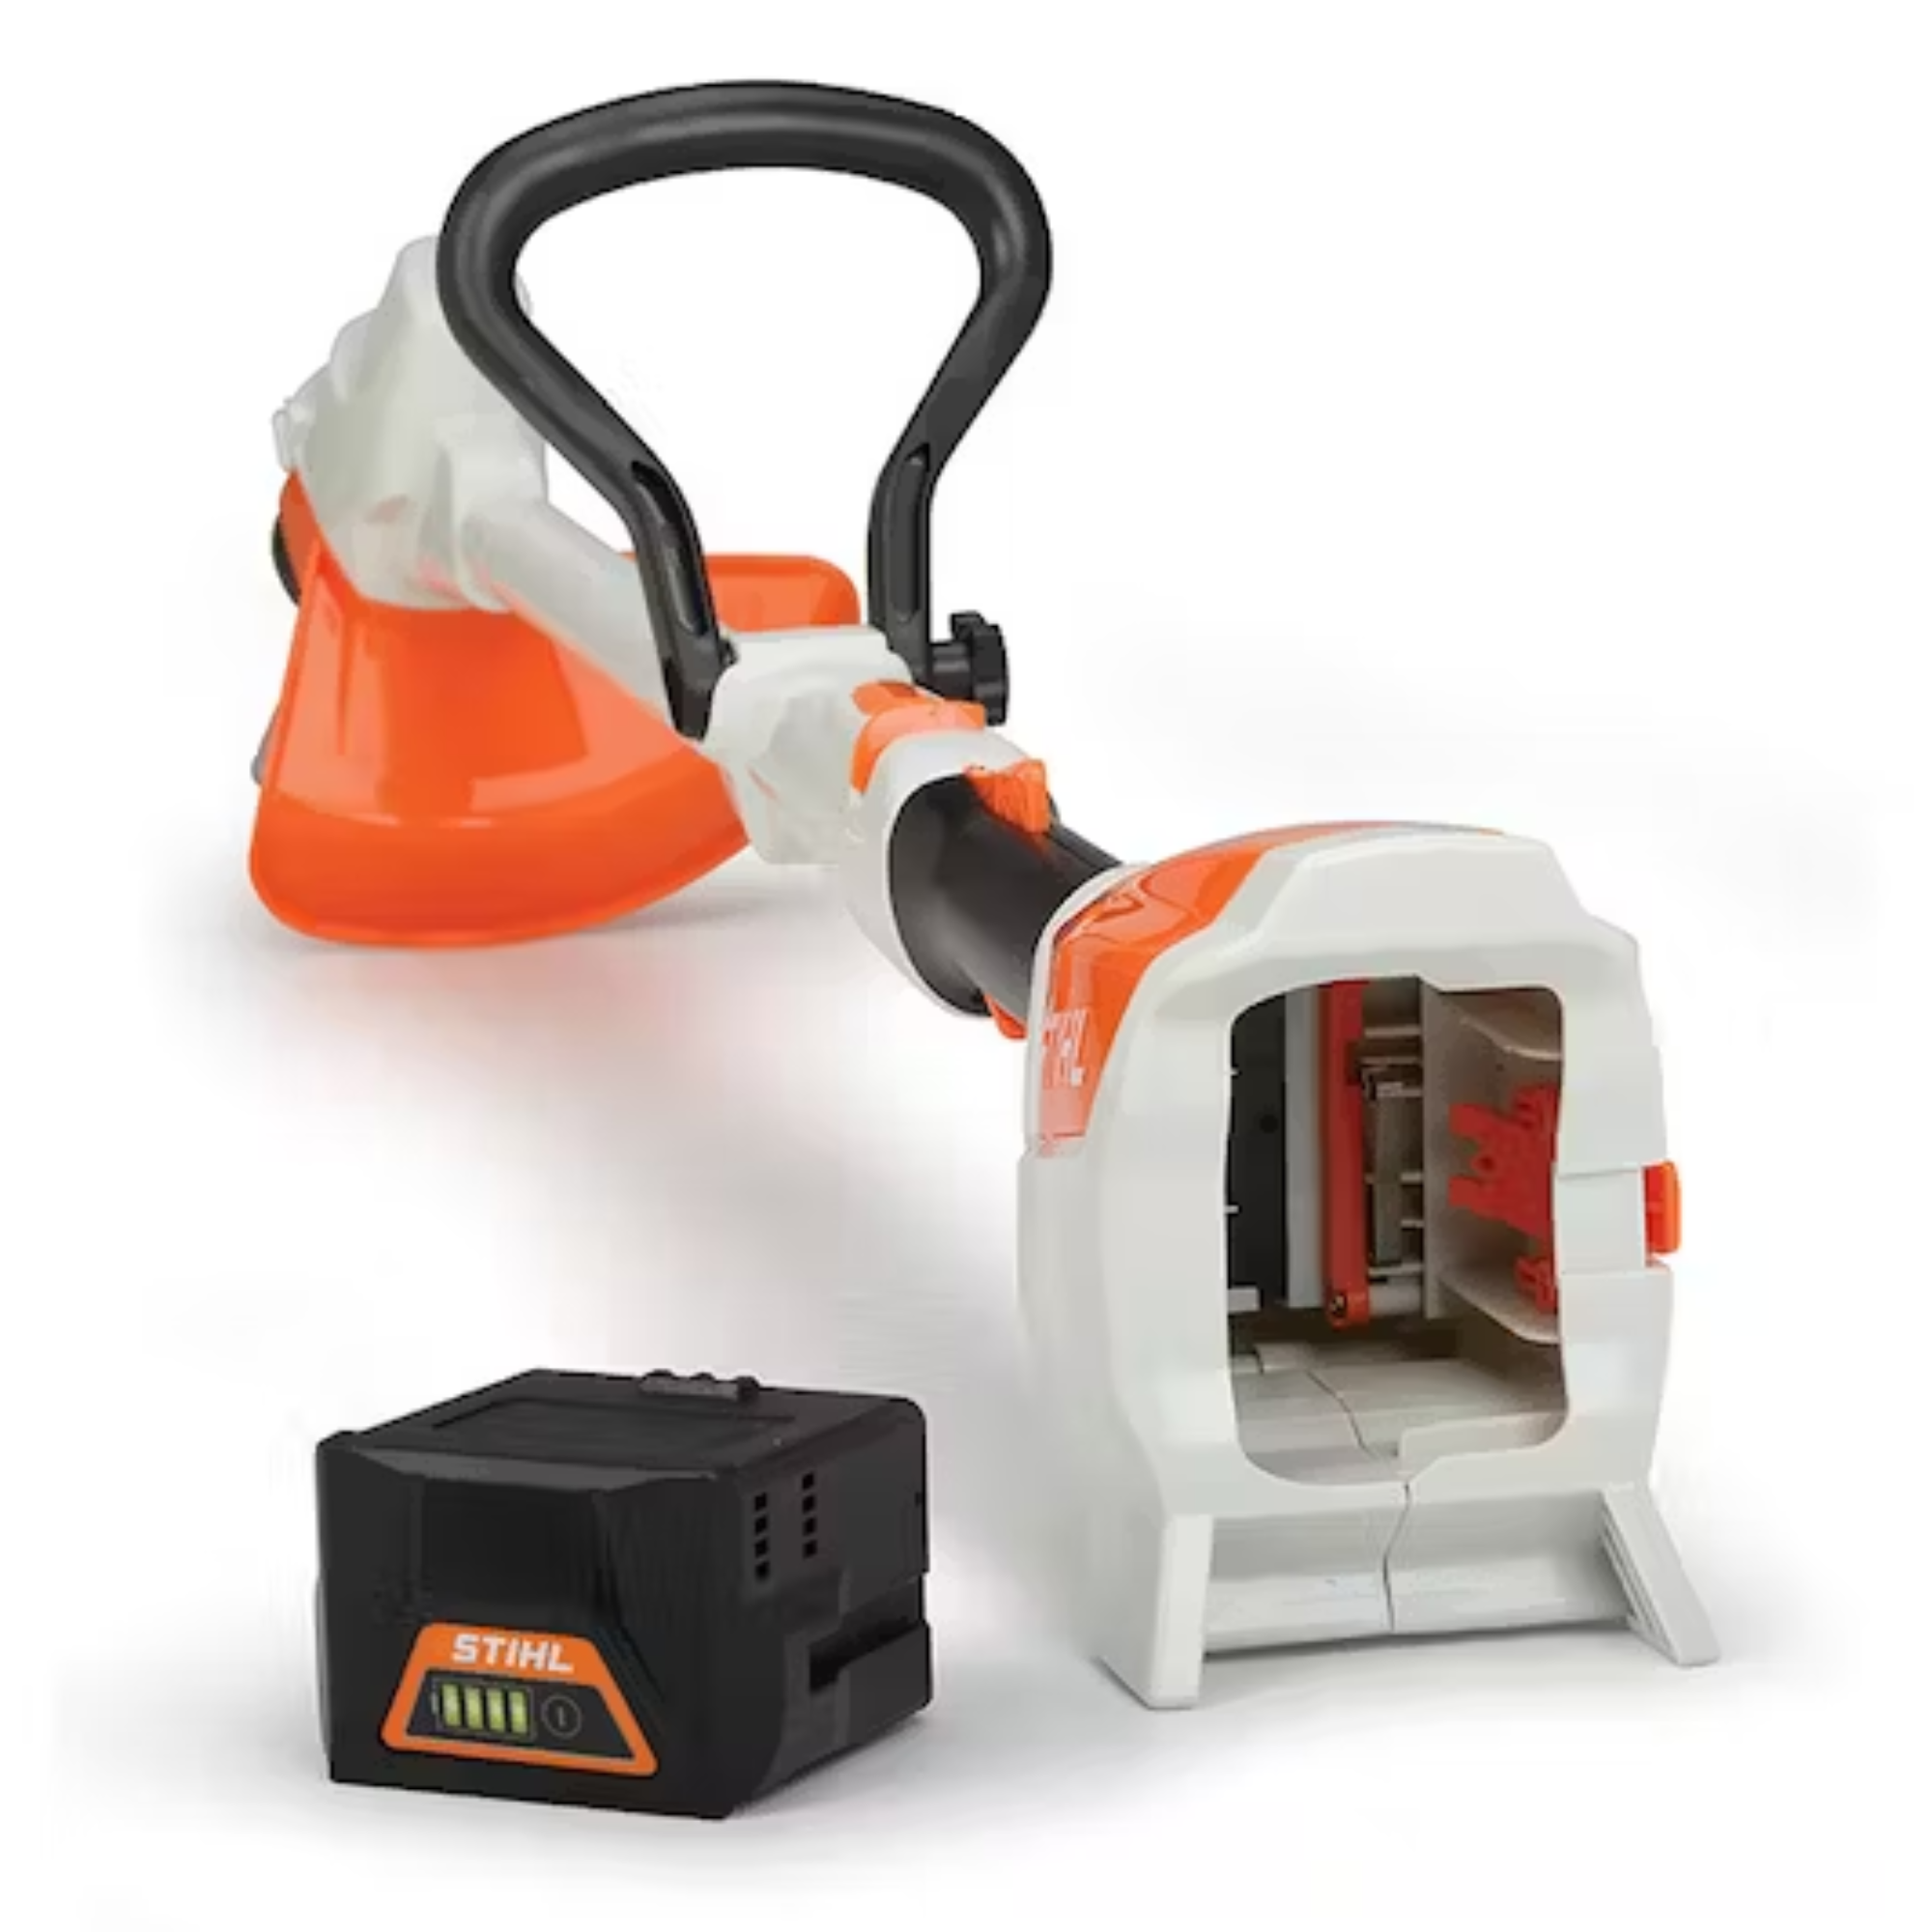 Stihl Childrens Battery Powered Toy Trimmer